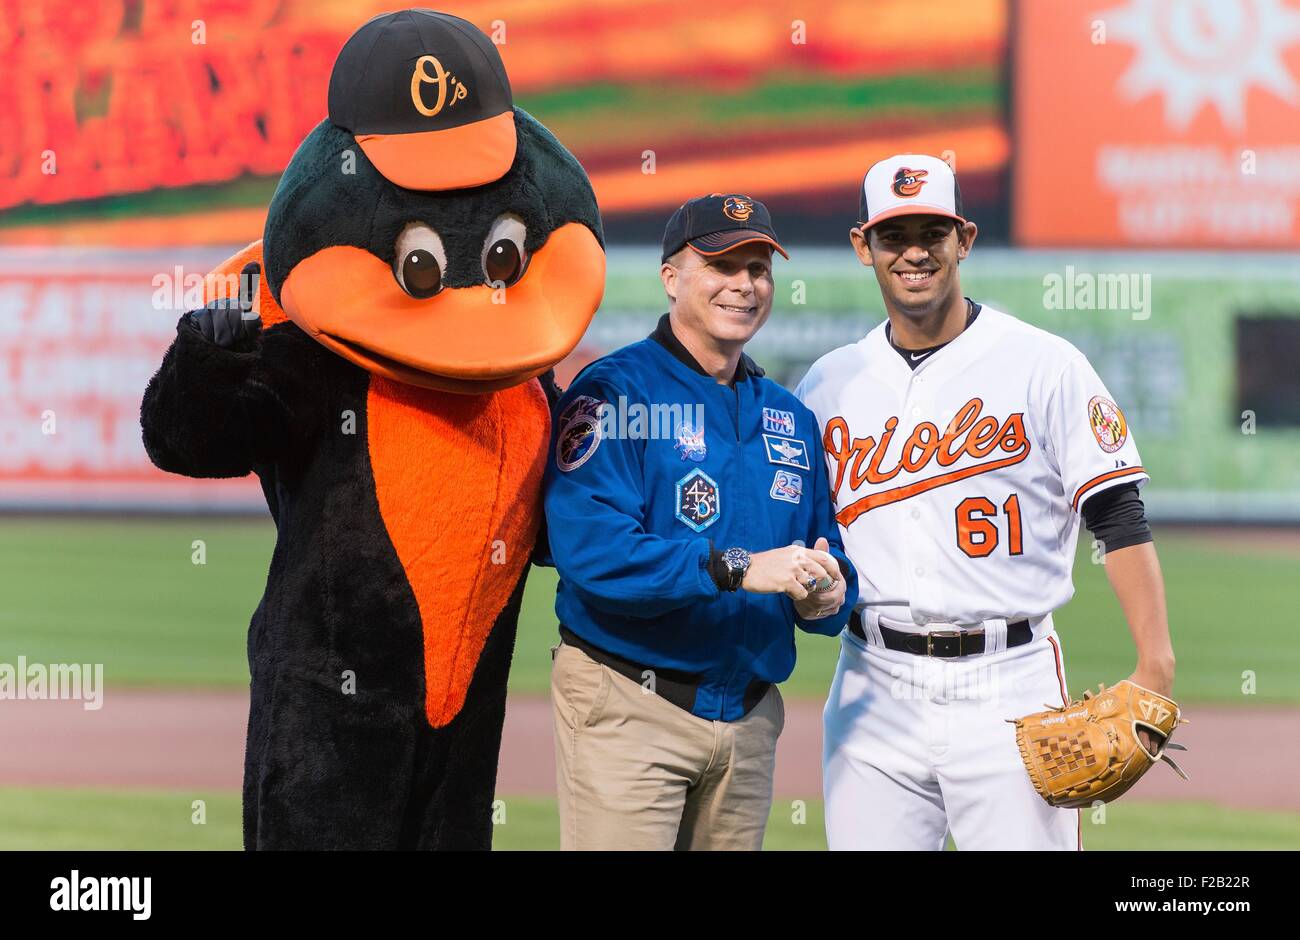 NASA astronaut and Maryland native, Terry Virts, center, poses for a picture with the Baltimore Orioles mascot and Orioles pitcher Jason Garcia, right, after throwing the ceremonial first pitch before the Boston Red Sox take on the Baltimore Orioles at Camden Yards baseball stadium September 14, 2015 in Baltimore, Maryland. Virts spend 199 days aboard the International Space Station. Stock Photo